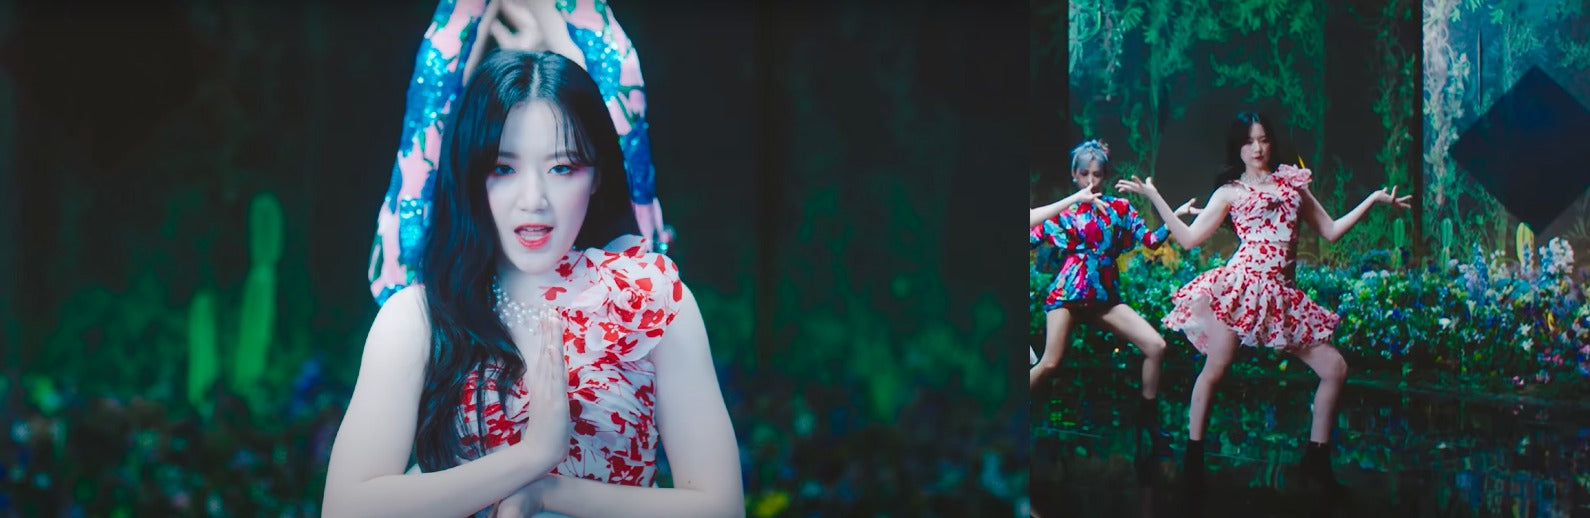 ic: Shuhua in a two-piece set from Bambah. Featured in (G)I-DLE’s music video, “HWAA.”